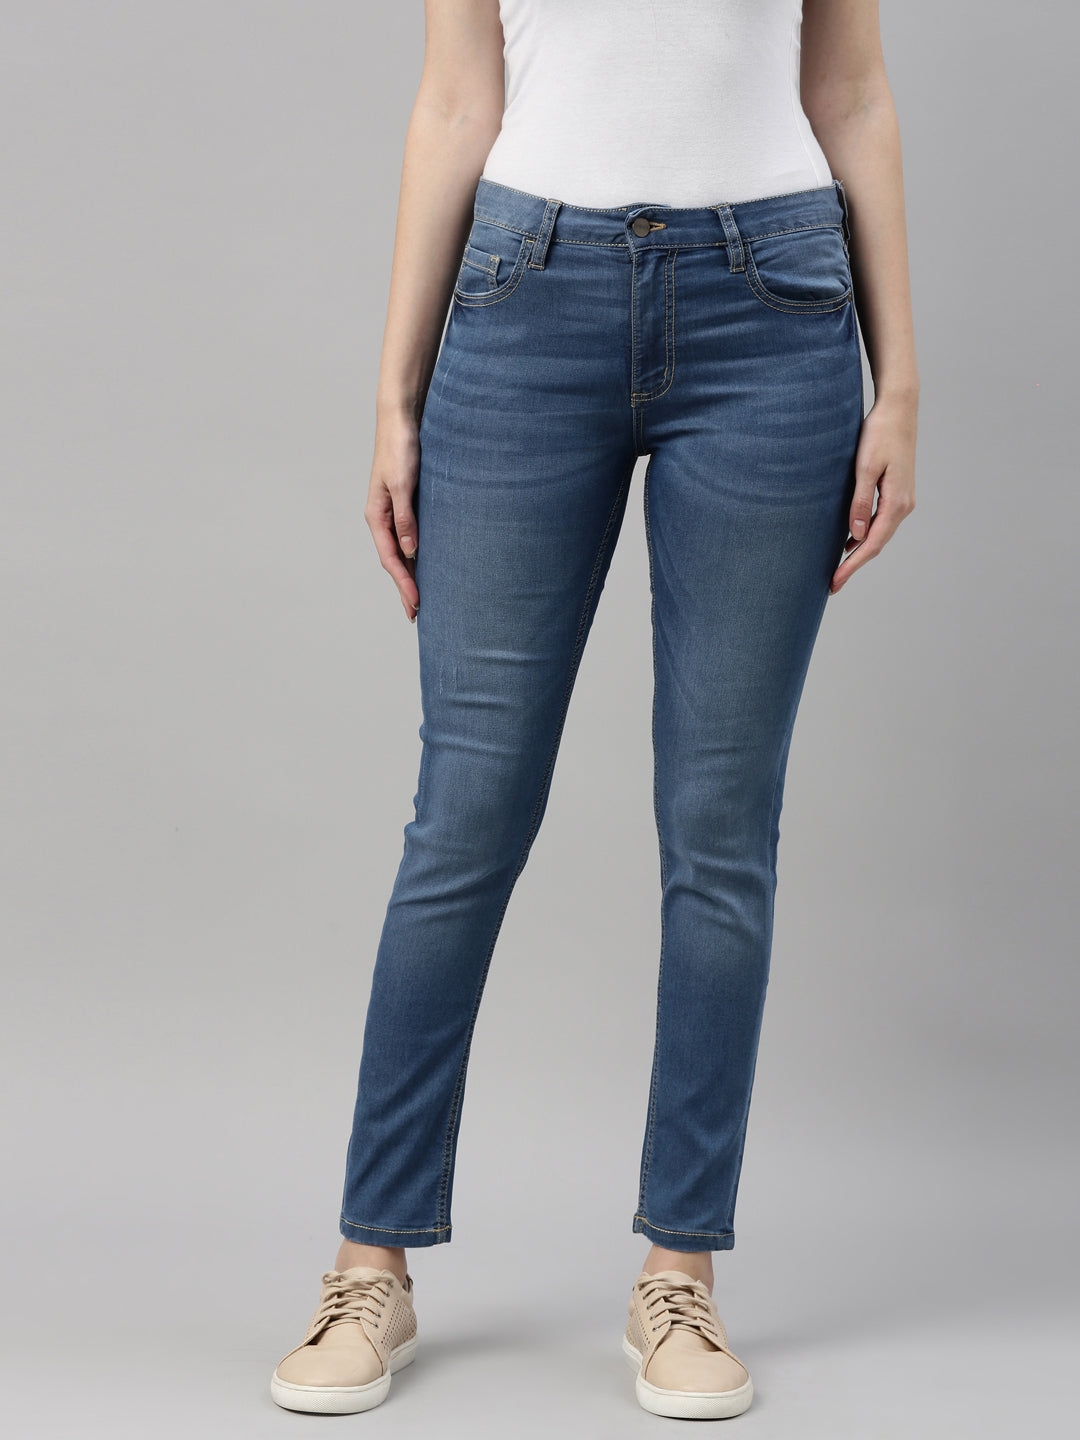 Buy Blue Washed Skinny Jeans For Women - ONLY